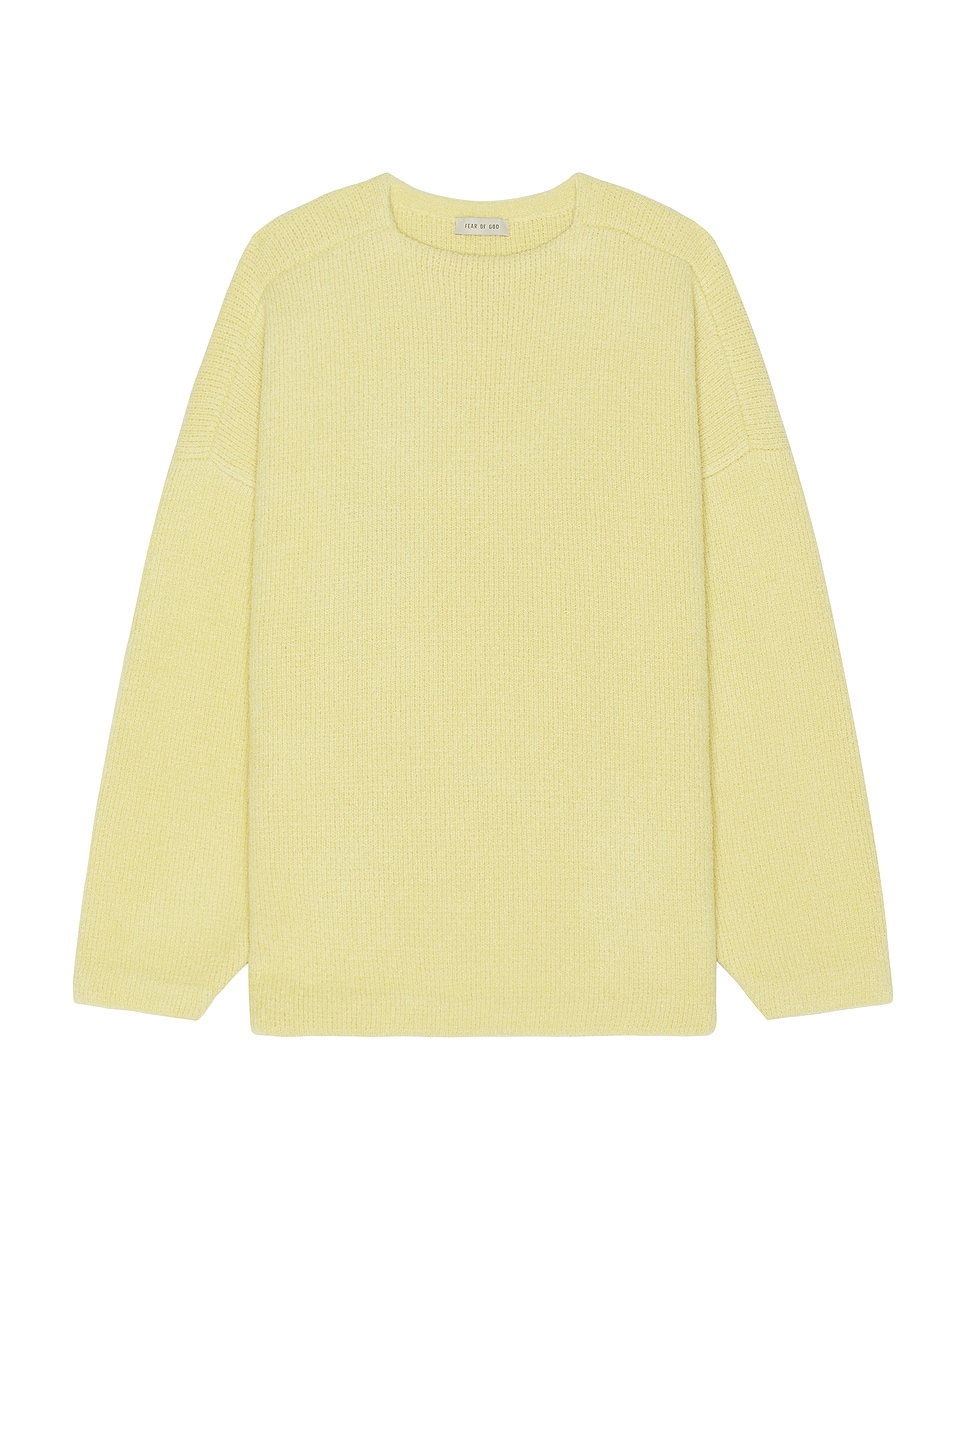 Image 1 of Fear of God Virgin Wool Boucle Straight Neck Relaxed Sweater in Lemon Cream